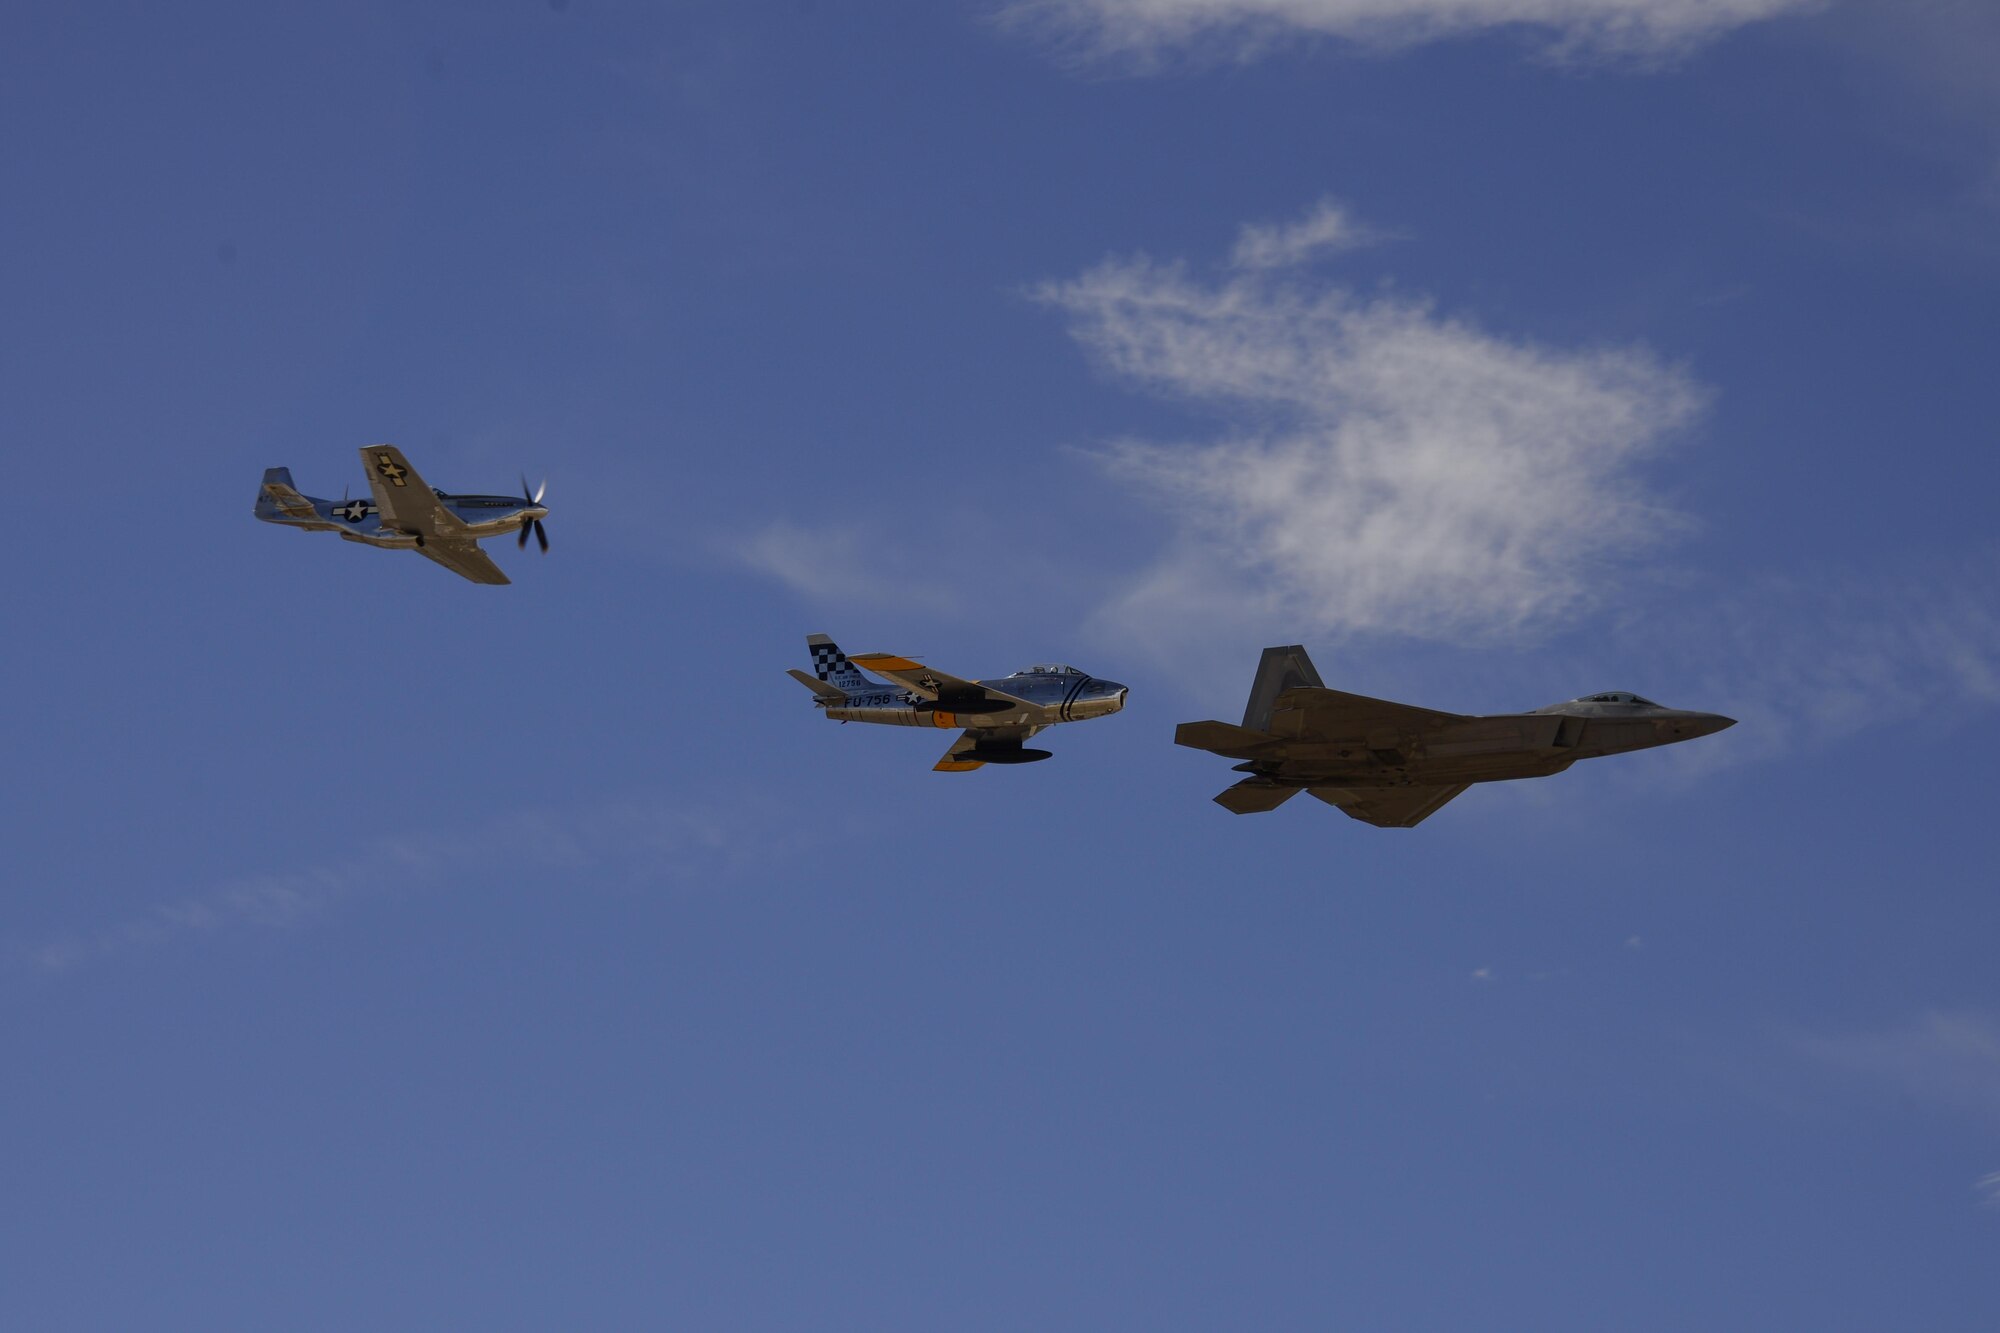 A U.S. Air Force F-22 Raptor, a F-86 Sabre and a P-51 Mustang fly in formation during the 2017 Heritage Flight Training and Certification Course at Davis-Monthan Air Force Base, Ariz., Feb. 11, 2017.  During the course, aircrews practice ground and flight training to enable civilian pilots of historic military aircraft and U.S. Air Force pilots of current fighter aircraft to fly safely in formations together. (U.S. Air Force photo by Senior Airman Betty R. Chevalier)